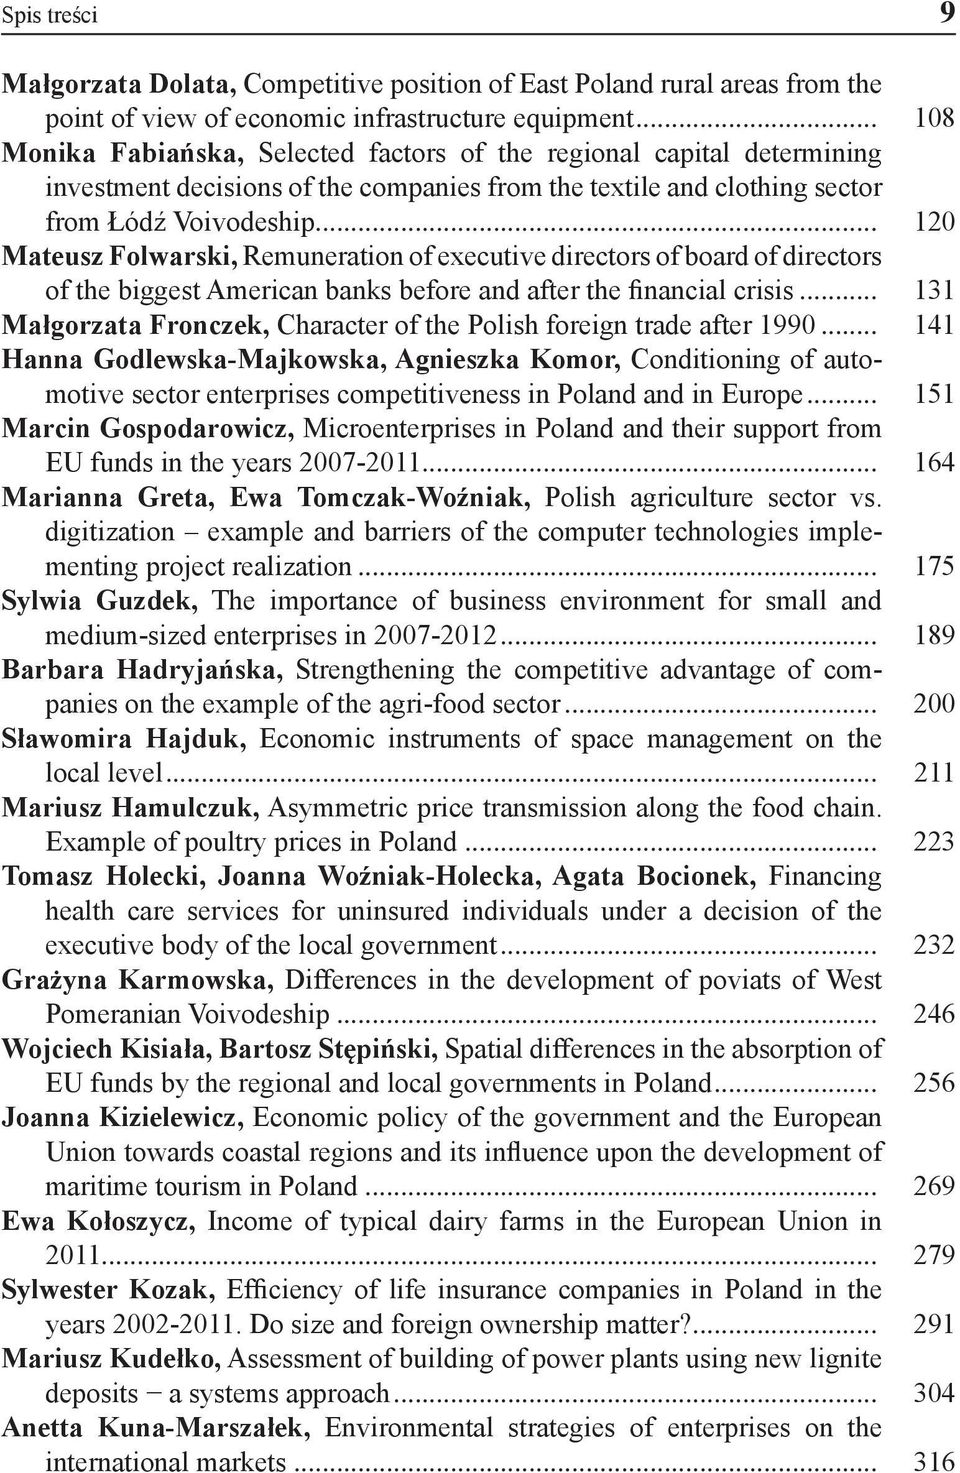 .. 120 Mateusz Folwarski, Remuneration of executive directors of board of directors of the biggest American banks before and after the financial crisis.